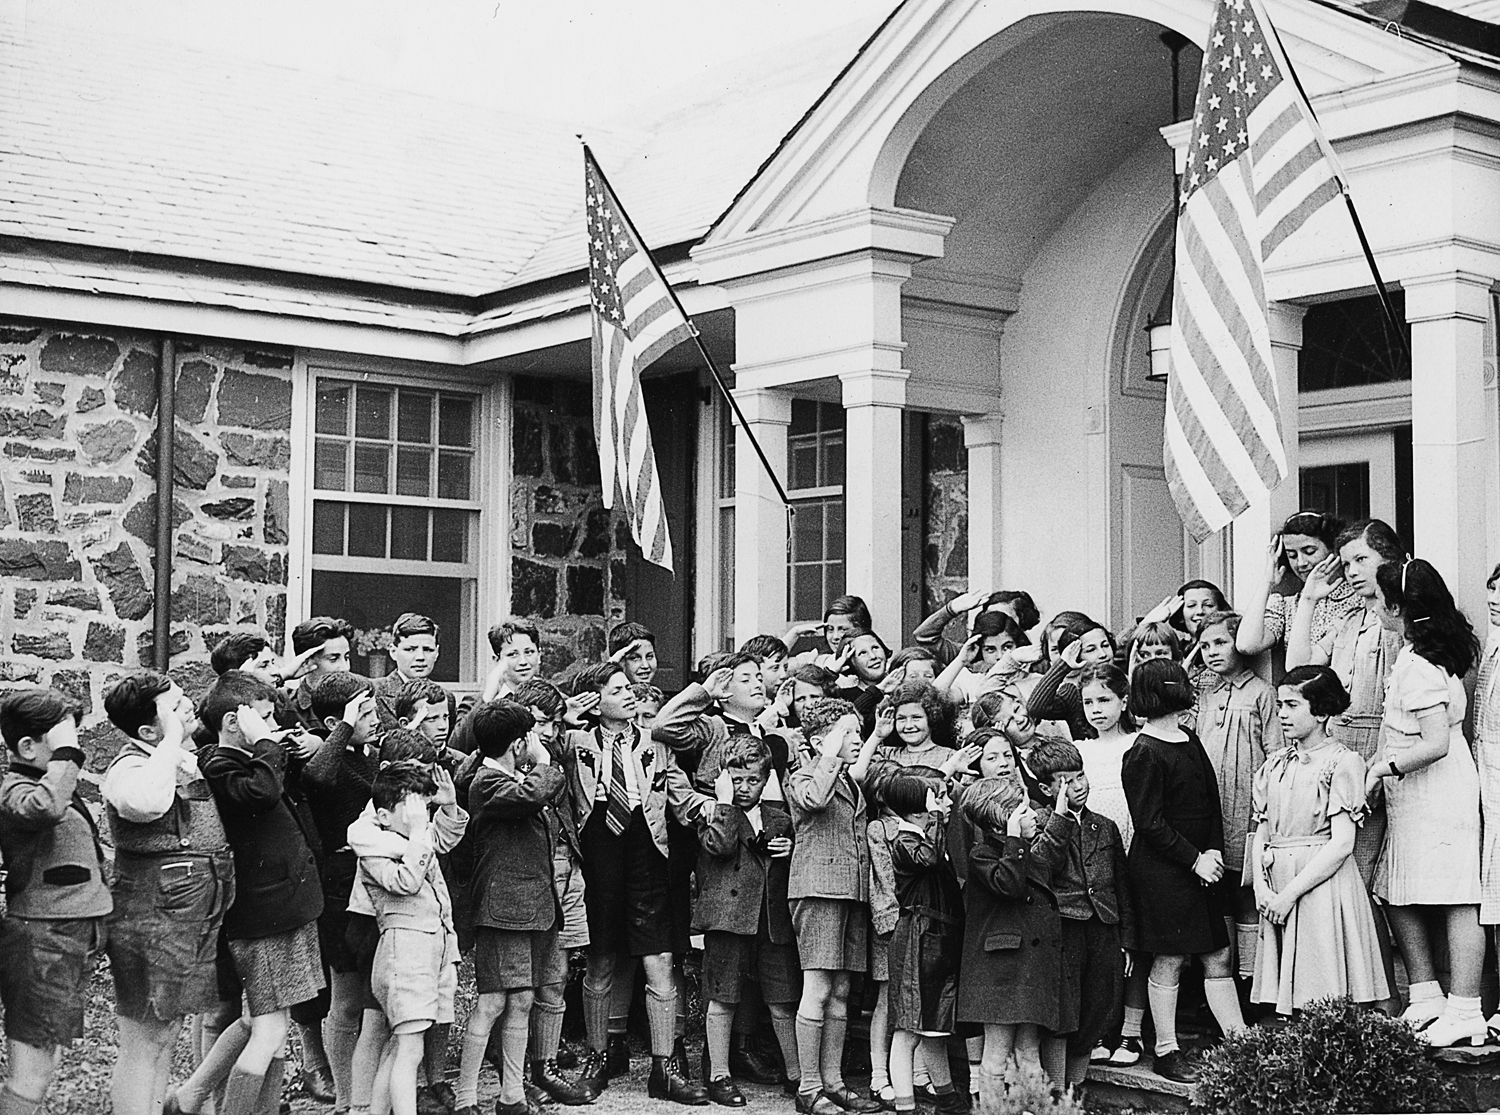 The children salute the American flag at the Brith Sholom house in Collegeville, Penn. Gil and Eleanor’s son, Steven, is standing in the top row between two saluting boys. To the lower left of the flag, their daughter, Ellen, is in a white dress.